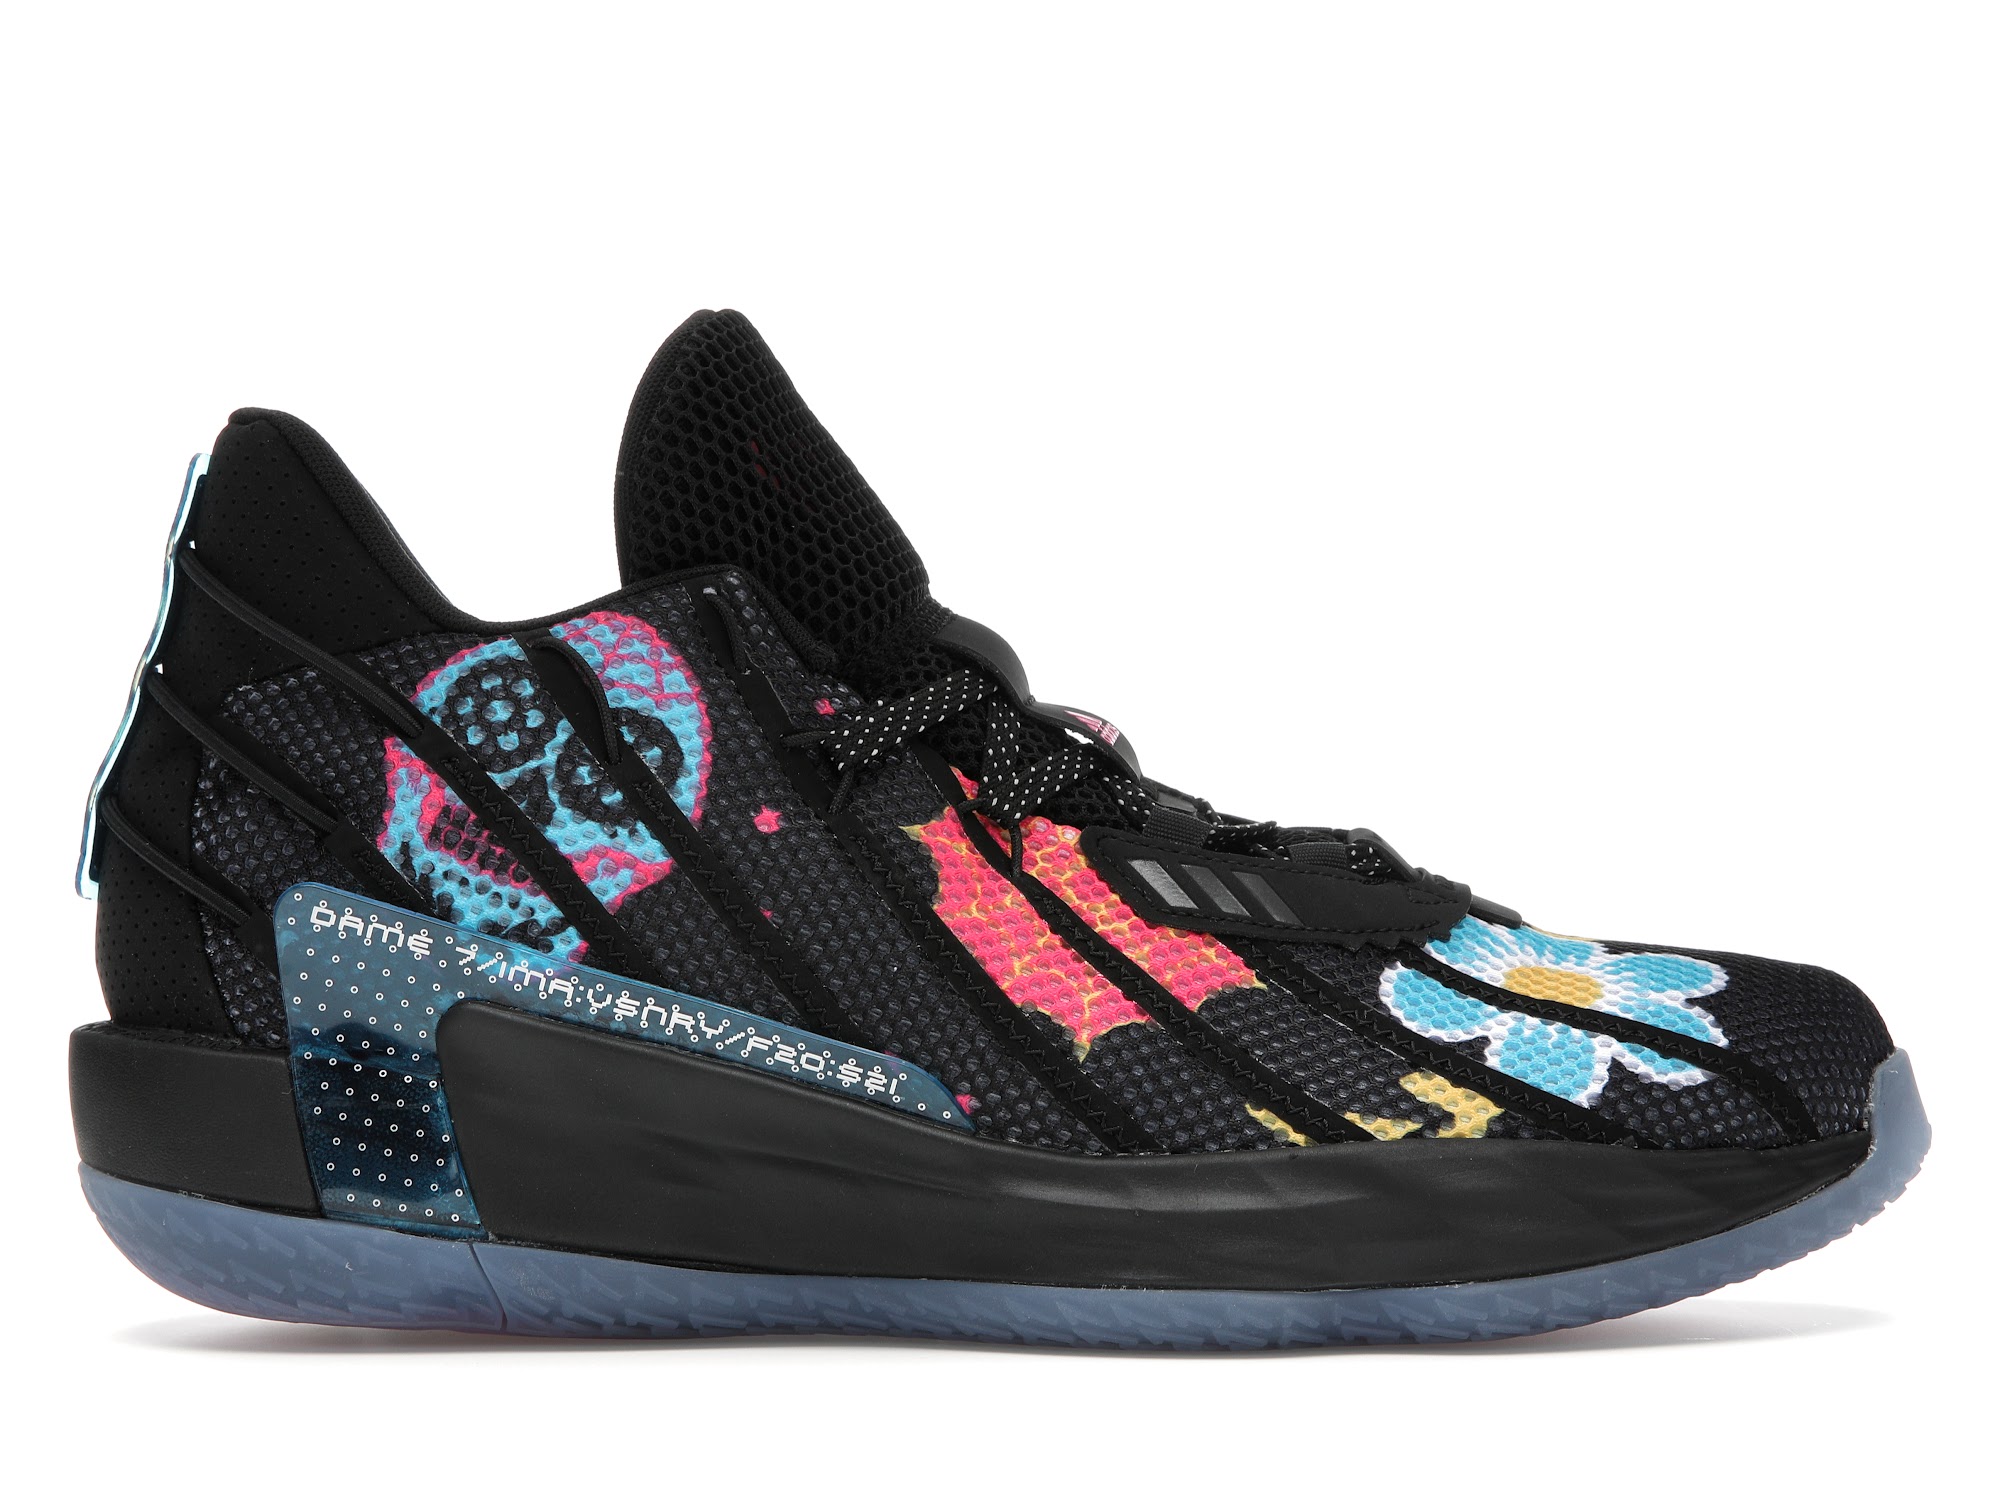 adidas Dame 7 Day of the Dead Men's - FZ3189 - US